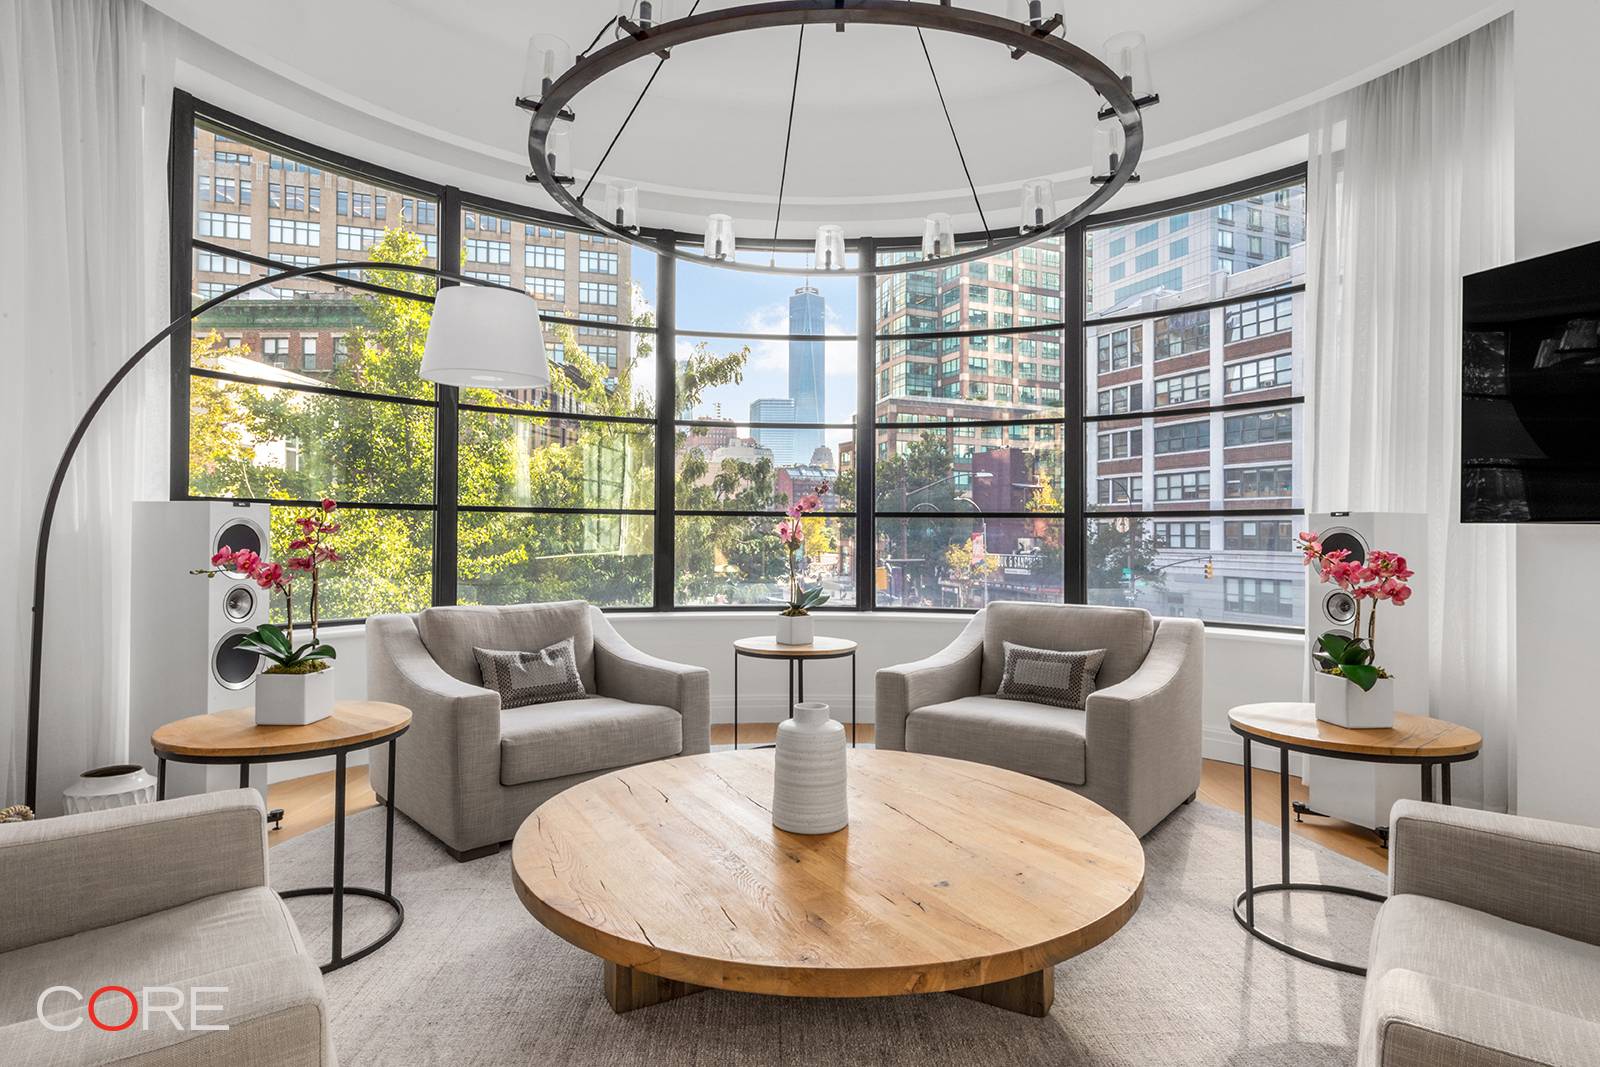 Designed by renowned architect, Cary Tamarkin, 10 Sullivan is a luxury boutique condominium located in the heart of SoHo, offering picturesque city views.